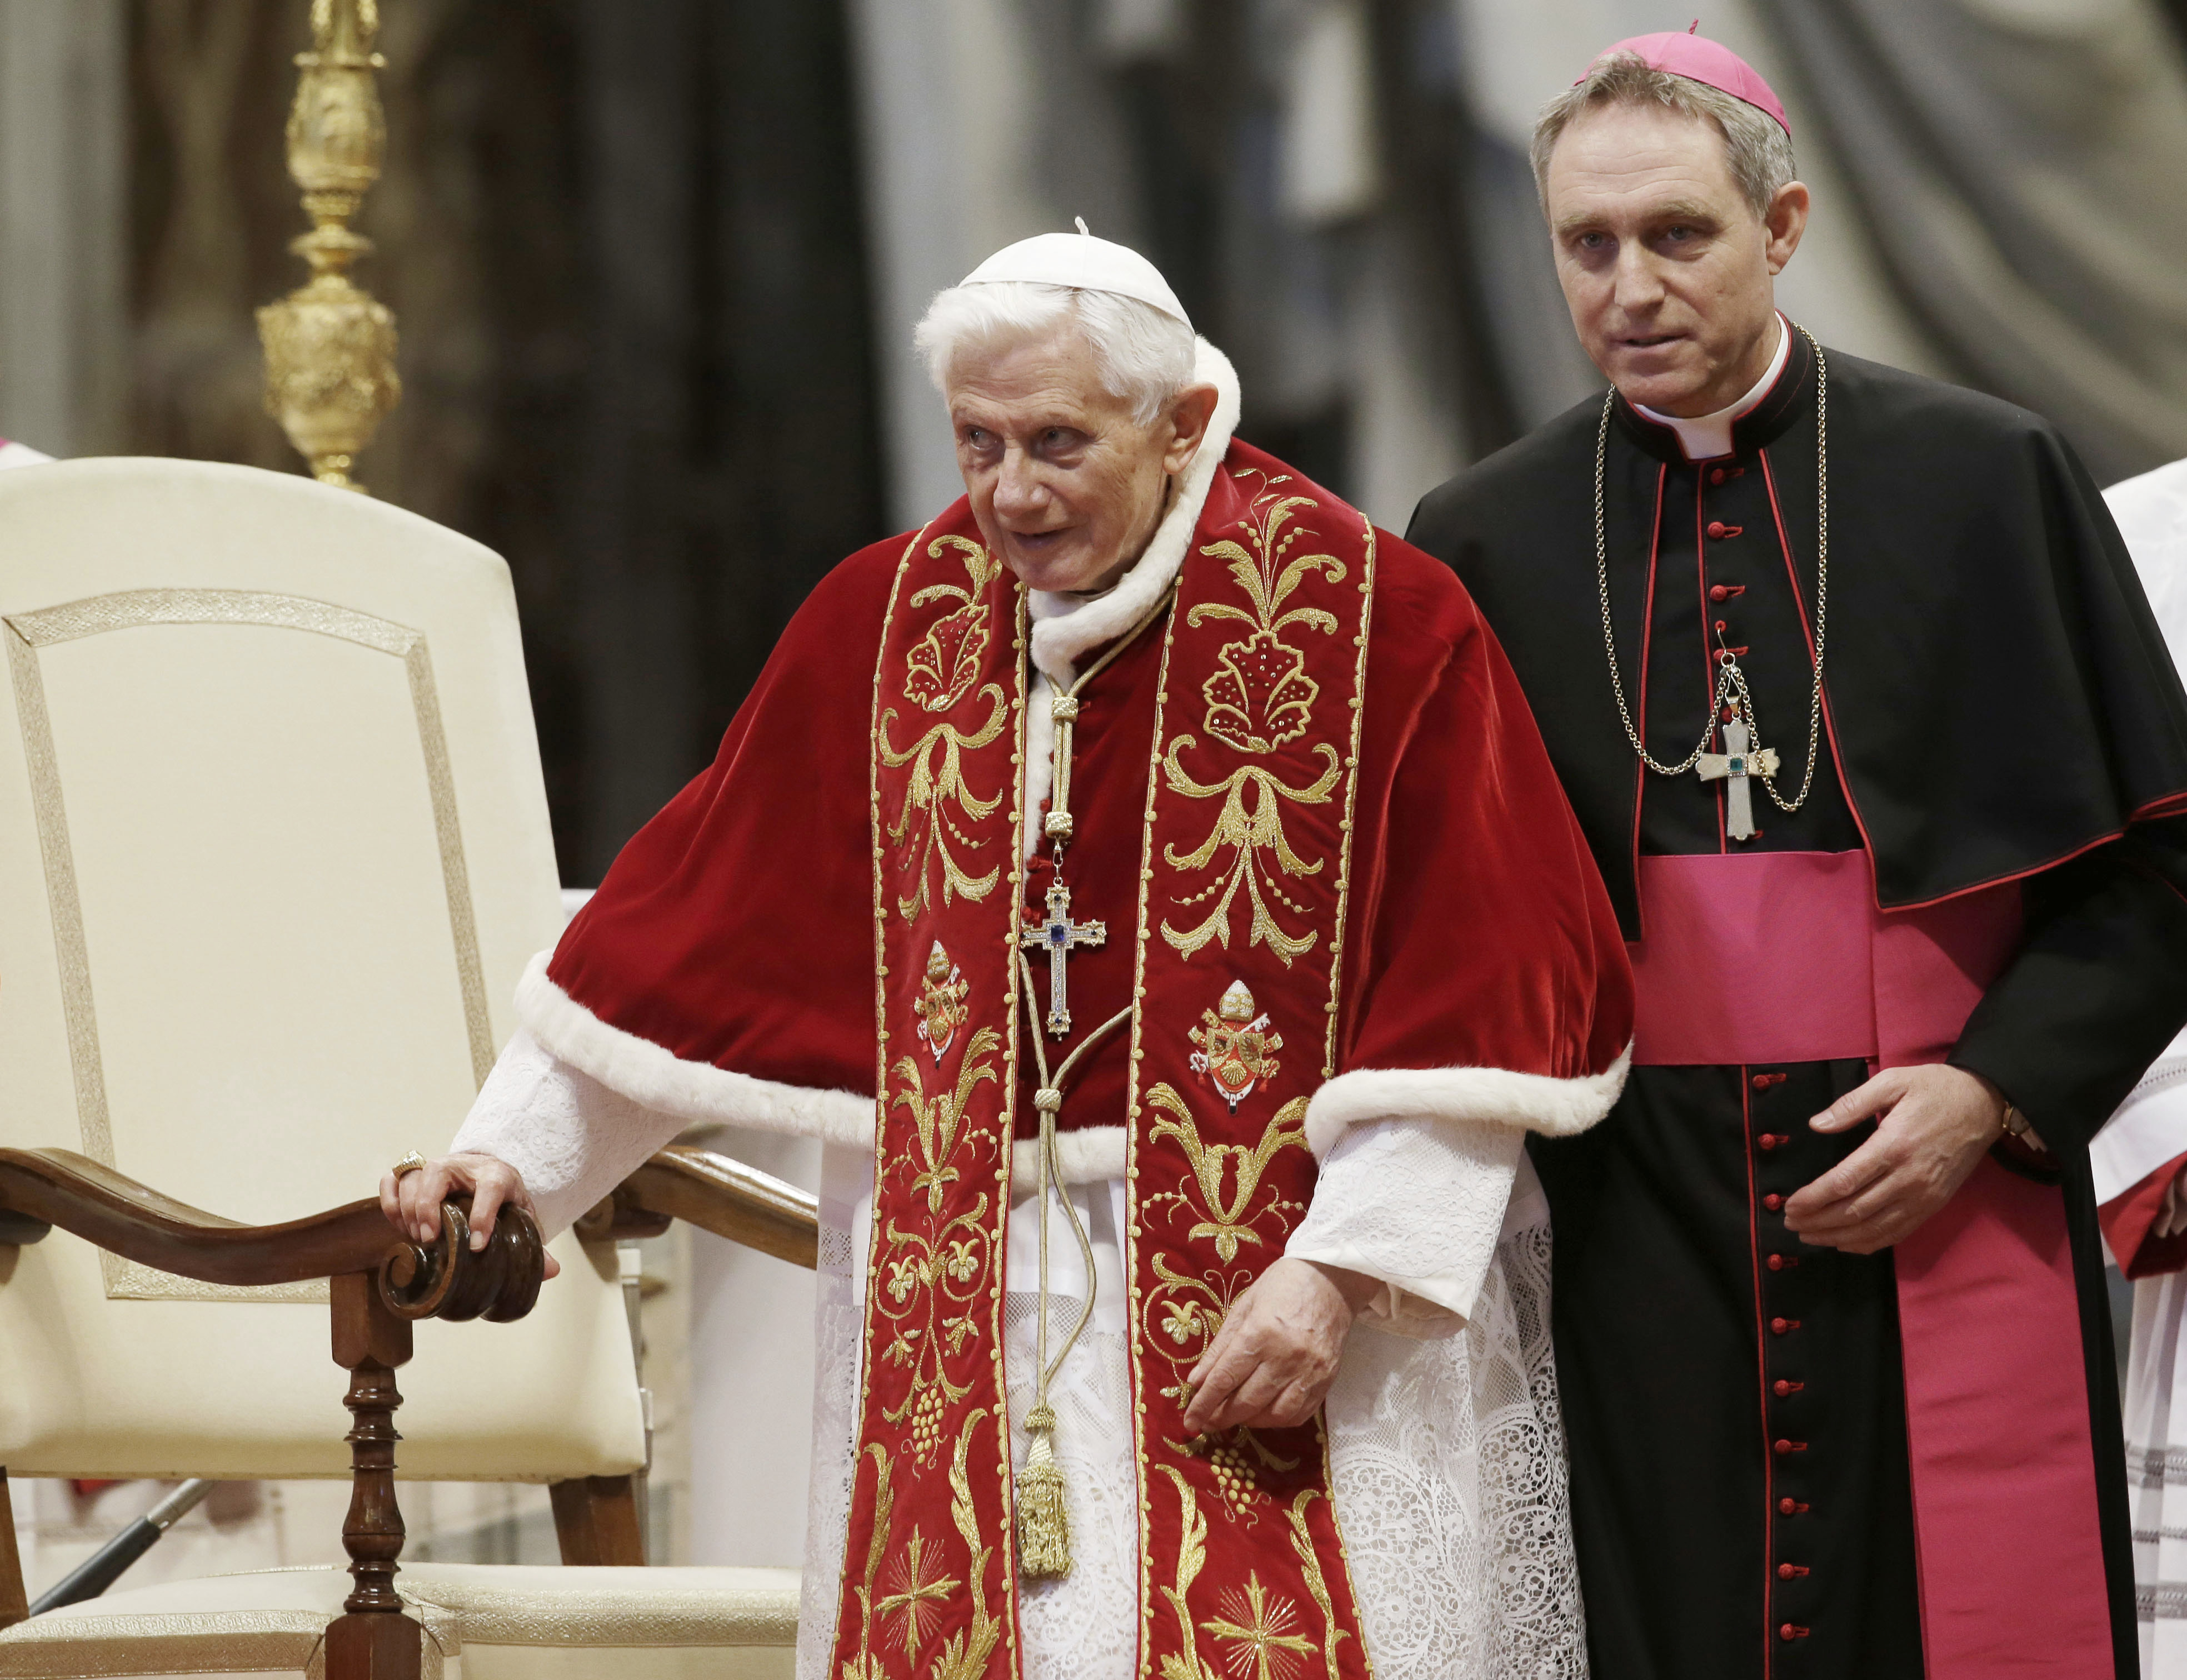 FILE - Pope Benedict XVI, accompanied by his personal secretary, Archbishop Georg Gaenswein, during the celebration of a mass for the 900th anniversary of the Knights of the Order of Malta, in Saint Peter's Basilica, in the Vatican, on 9 February 2013. (AP Photo/Gregorio Borgia, File)